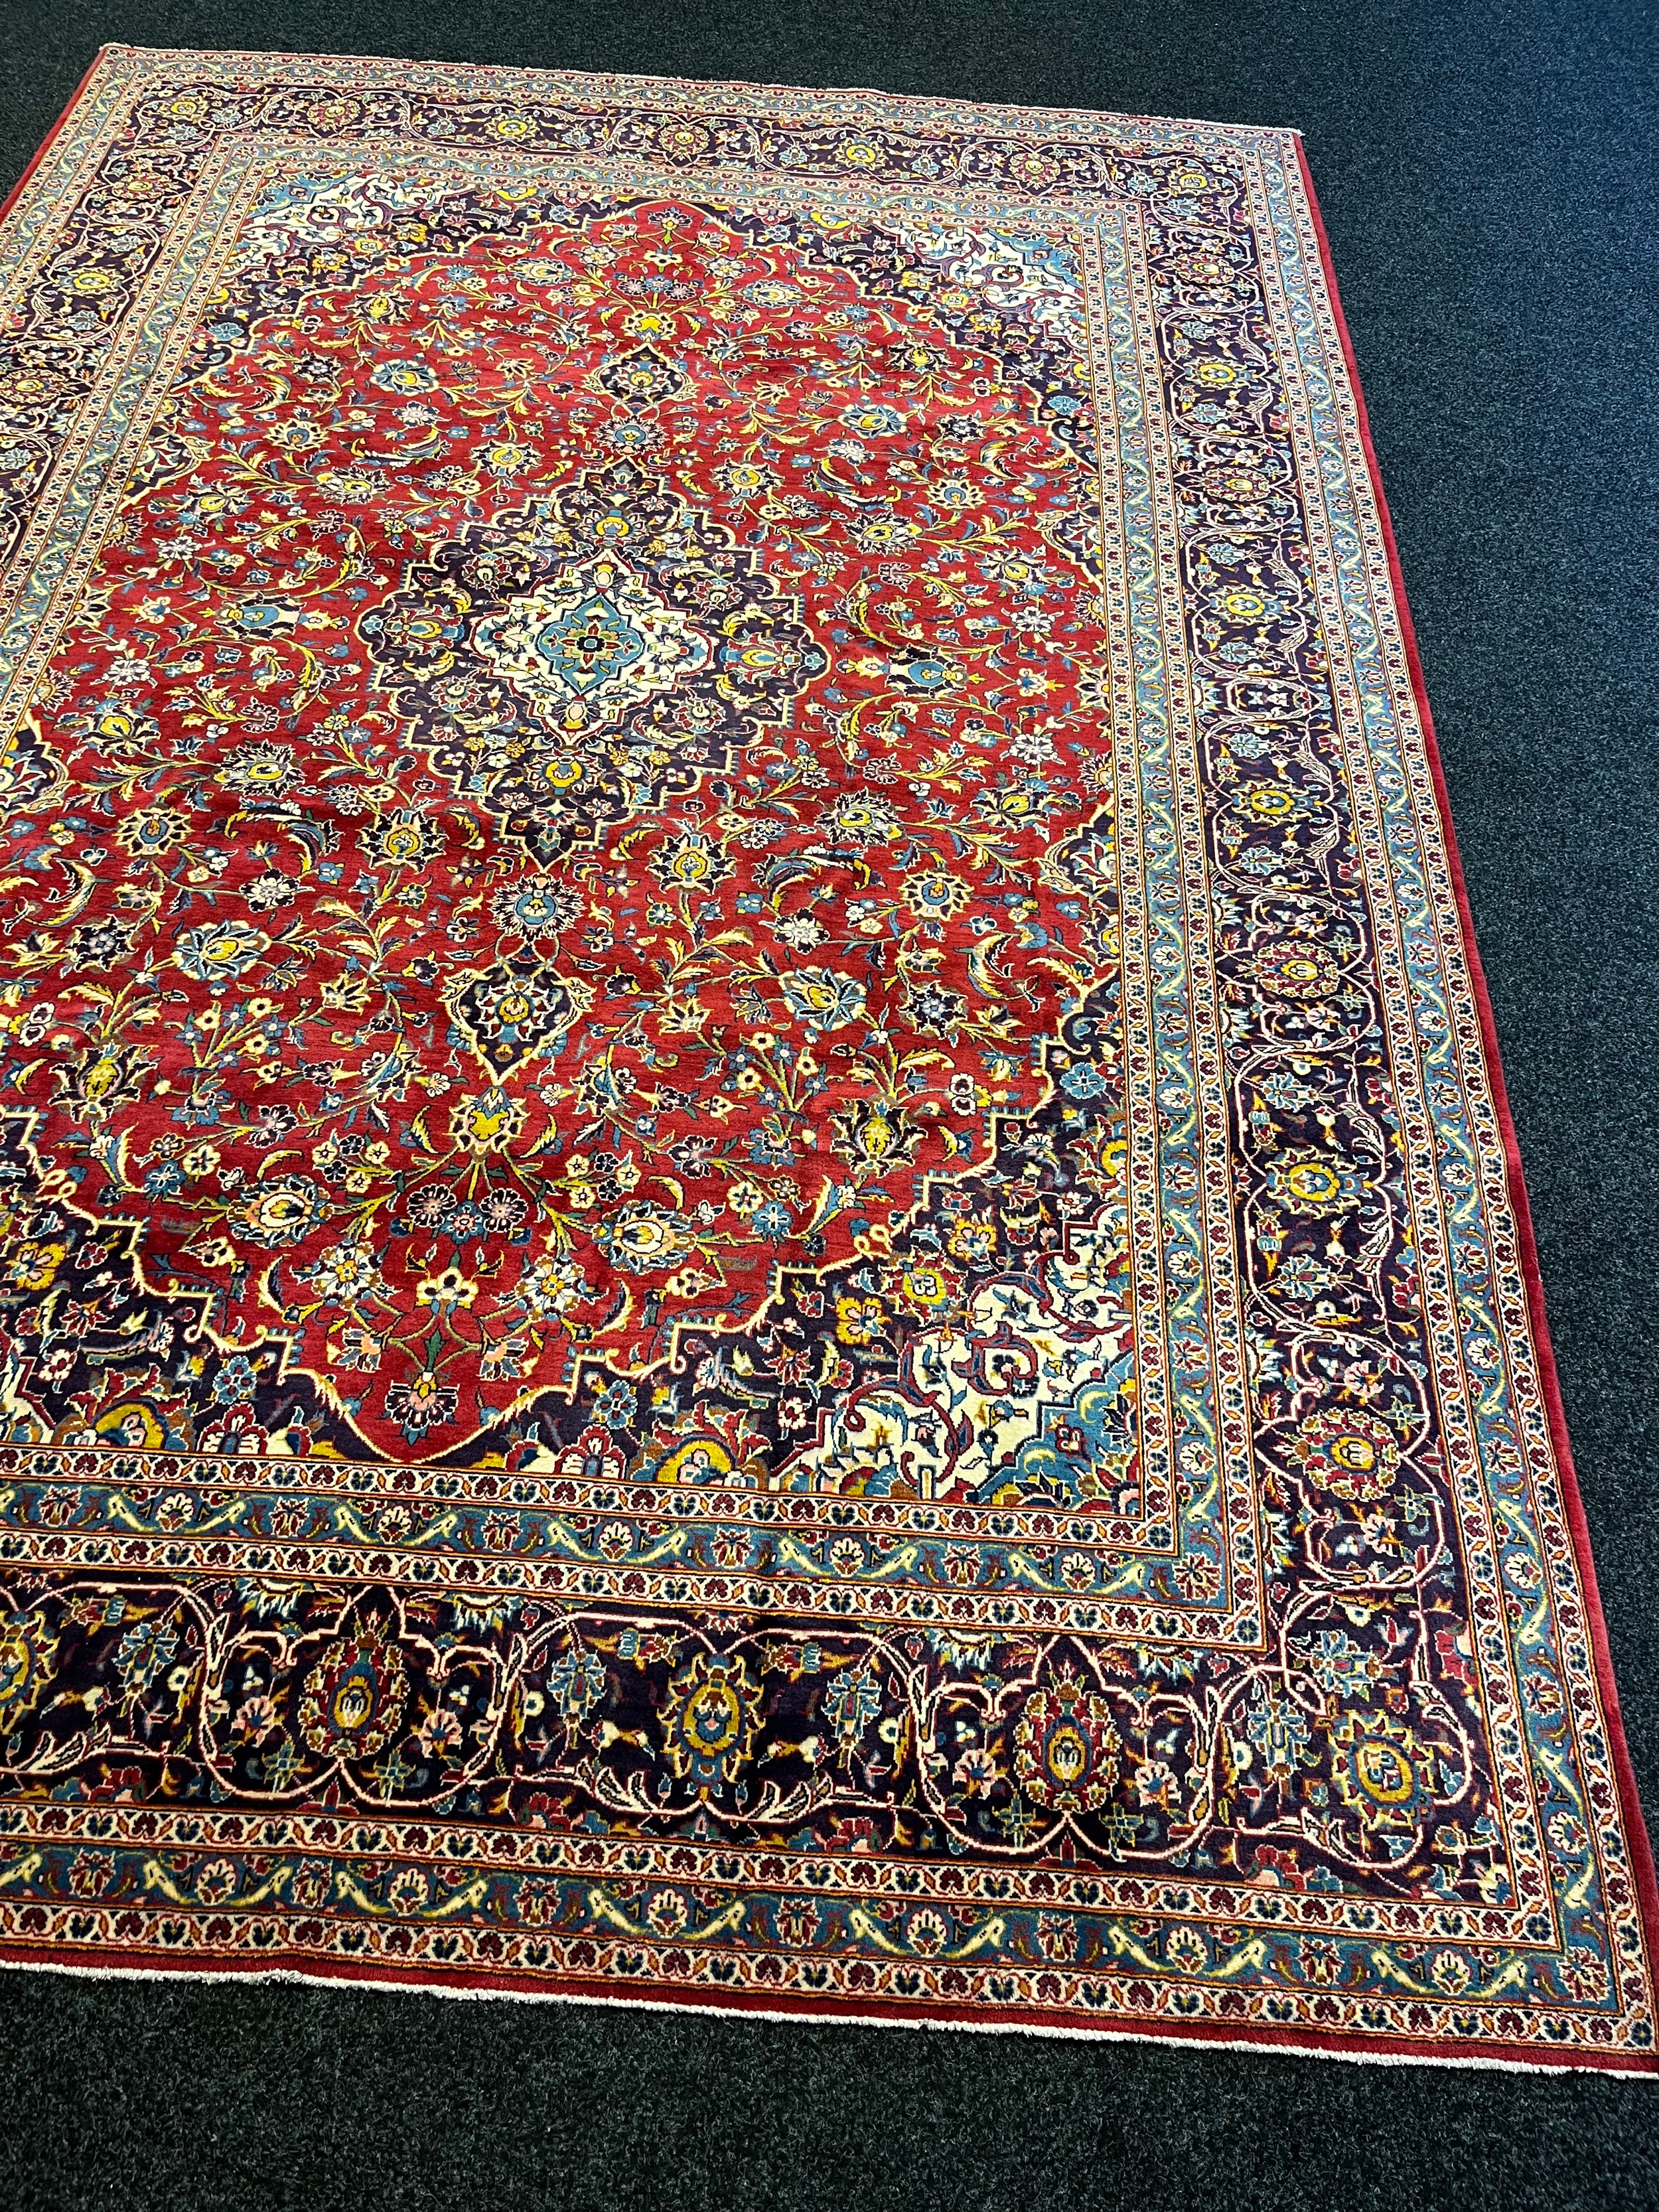 Large Persian carpet/rug, highly decorative with red ground. [535x296cm] - Image 3 of 7